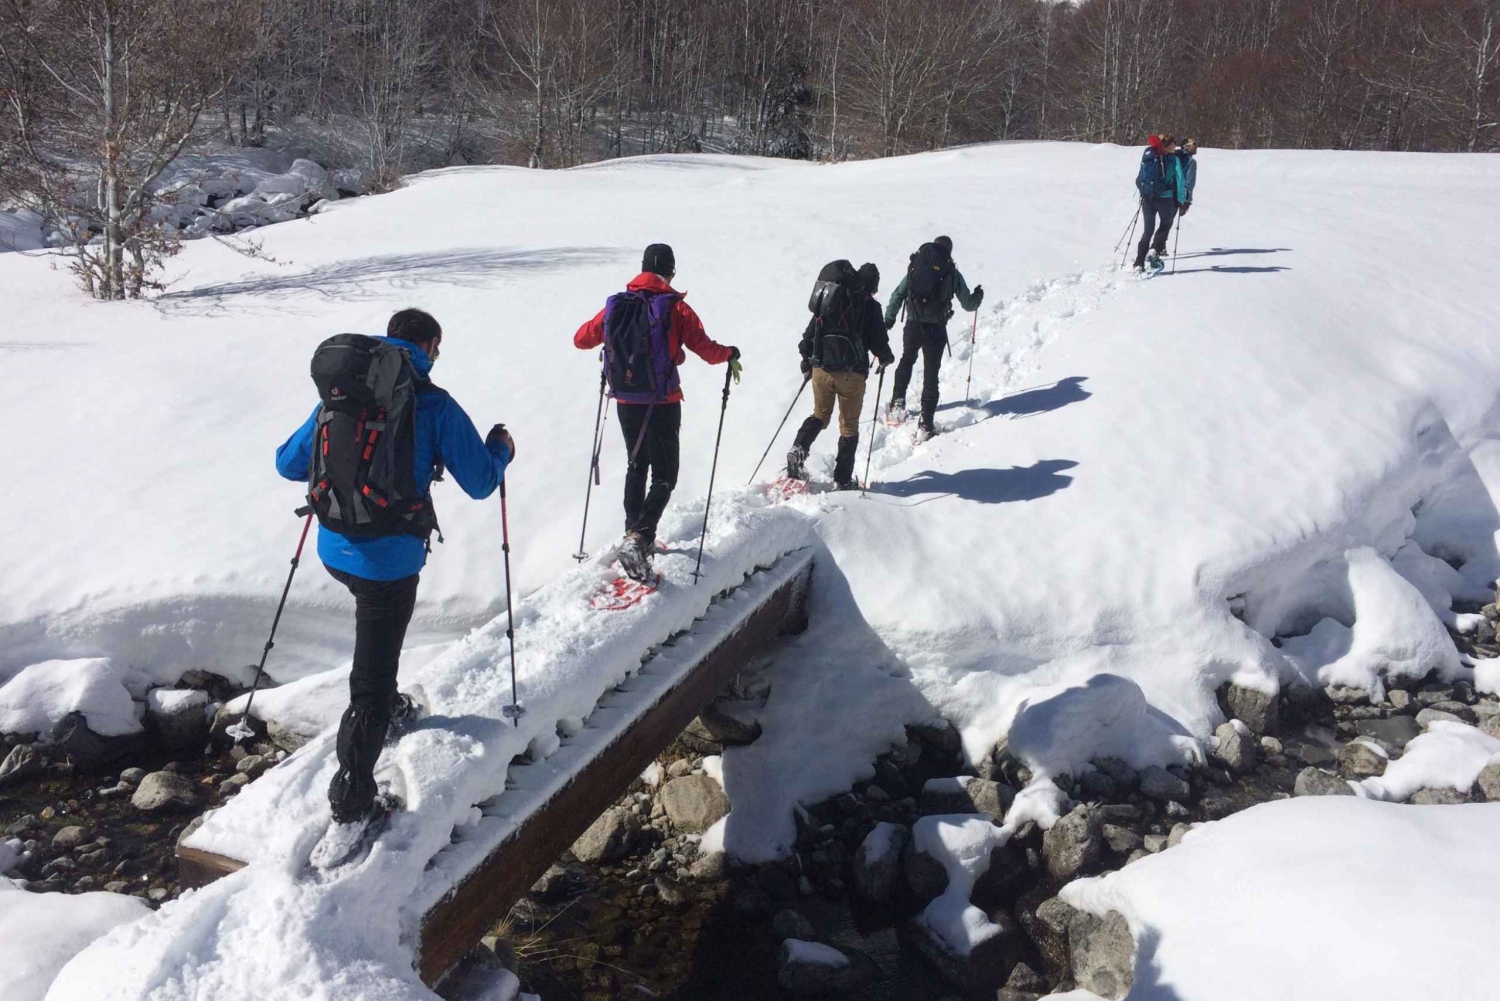 From Barcelona: Snowshoeing in the Pyrenees